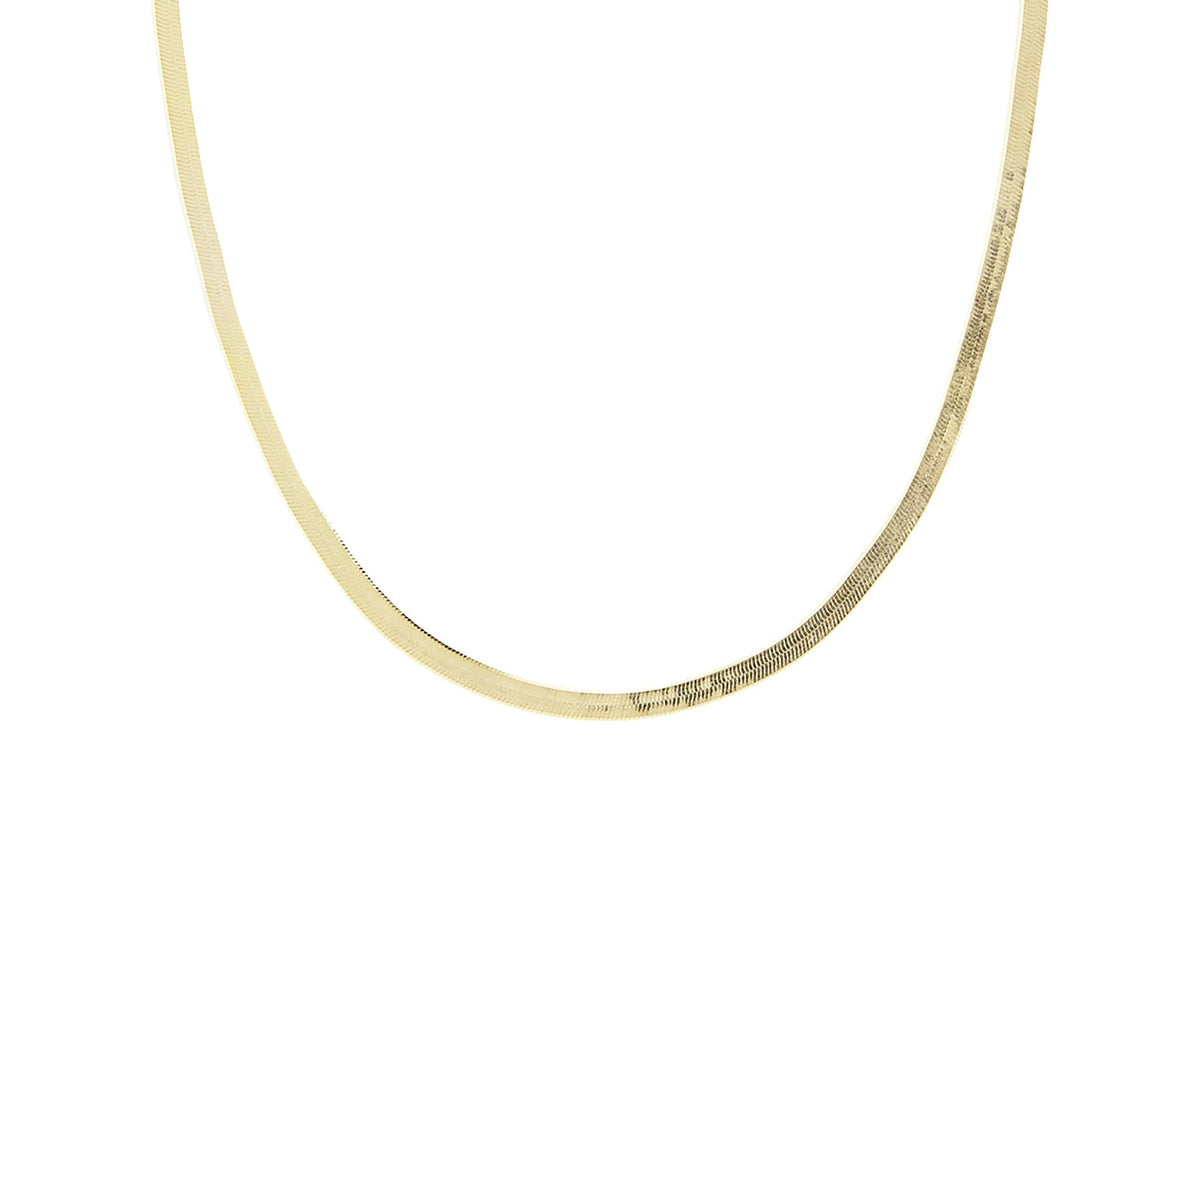 CHARMING HERRINGBONE CHAIN 14-16.5 &quot; NECKLACE GOLD - SO PRETTY CARA COTTER